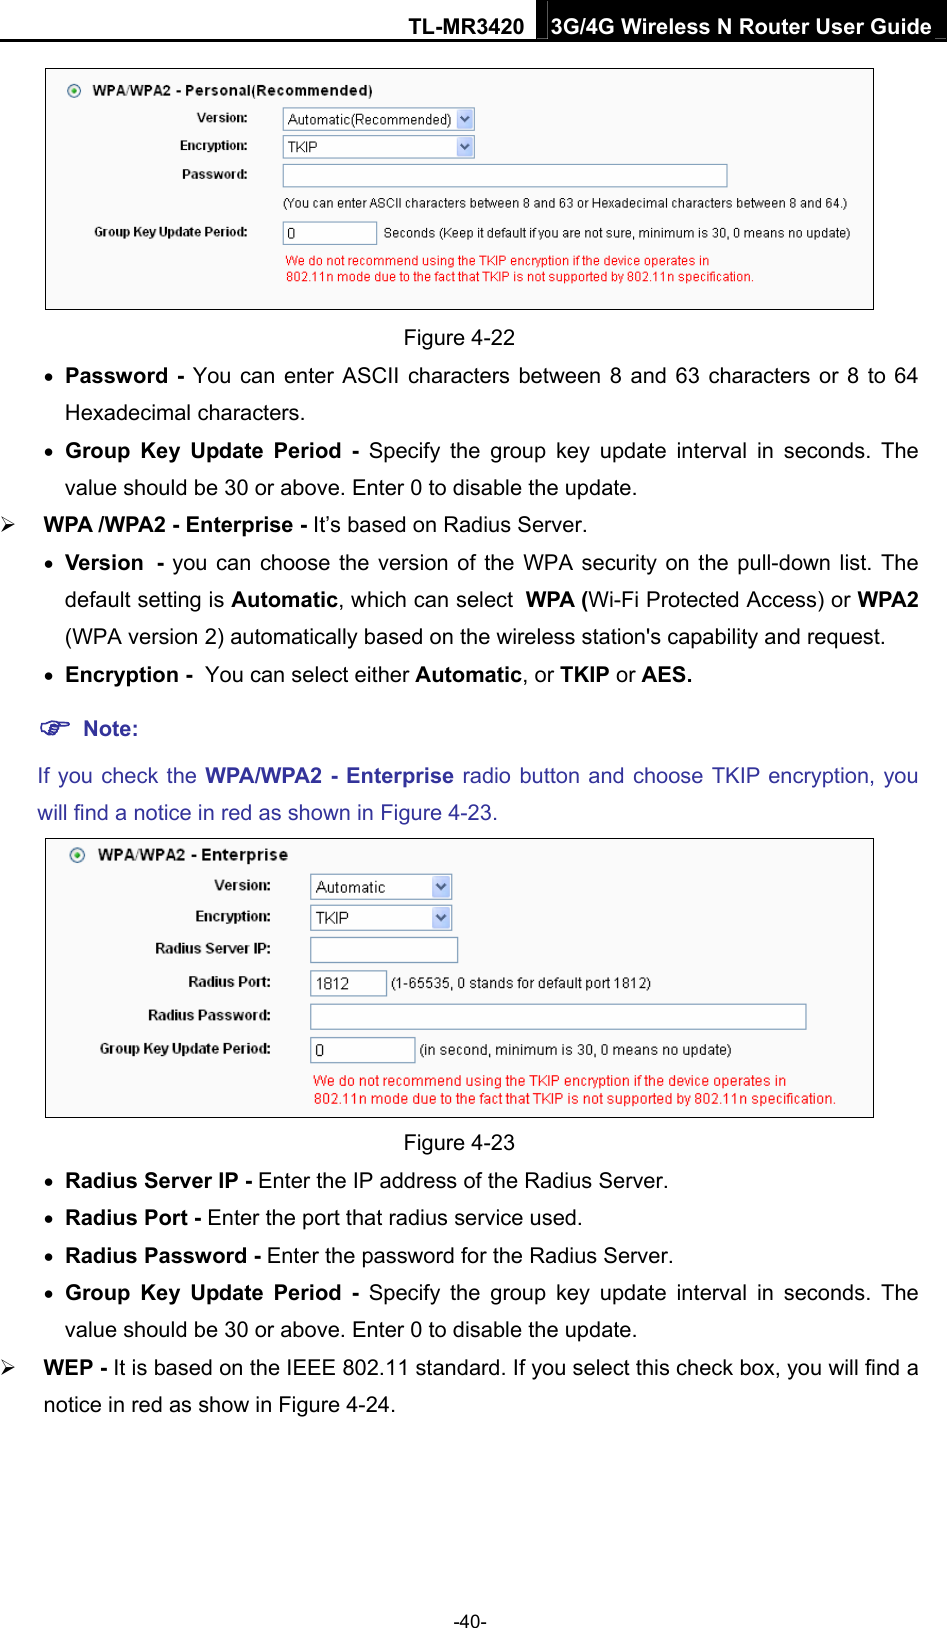 TL-MR3420 3G/4G Wireless N Router User Guide  Figure 4-22  Password - You can enter ASCII characters between 8 and 63 characters or 8 to 64 Hexadecimal characters.  Group Key Update Period - Specify the group key update interval in seconds. The value should be 30 or above. Enter 0 to disable the update.  WPA /WPA2 - Enterprise - It’s based on Radius Server.  Version - you can choose the version of the WPA security on the pull-down list. The default setting is Automatic, which can select WPA (Wi-Fi Protected Access) or WPA2 (WPA version 2) automatically based on the wireless station&apos;s capability and request.  Encryption - You can select either Automatic, or TKIP or AES.  Note:  If you check the WPA/WPA2 - Enterprise radio button and choose TKIP encryption, you will find a notice in red as shown in Figure 4-23.  Figure 4-23  Radius Server IP - Enter the IP address of the Radius Server.  Radius Port - Enter the port that radius service used.  Radius Password - Enter the password for the Radius Server.  Group Key Update Period - Specify the group key update interval in seconds. The value should be 30 or above. Enter 0 to disable the update.  WEP - It is based on the IEEE 802.11 standard. If you select this check box, you will find a notice in red as show in Figure 4-24.  -40- 